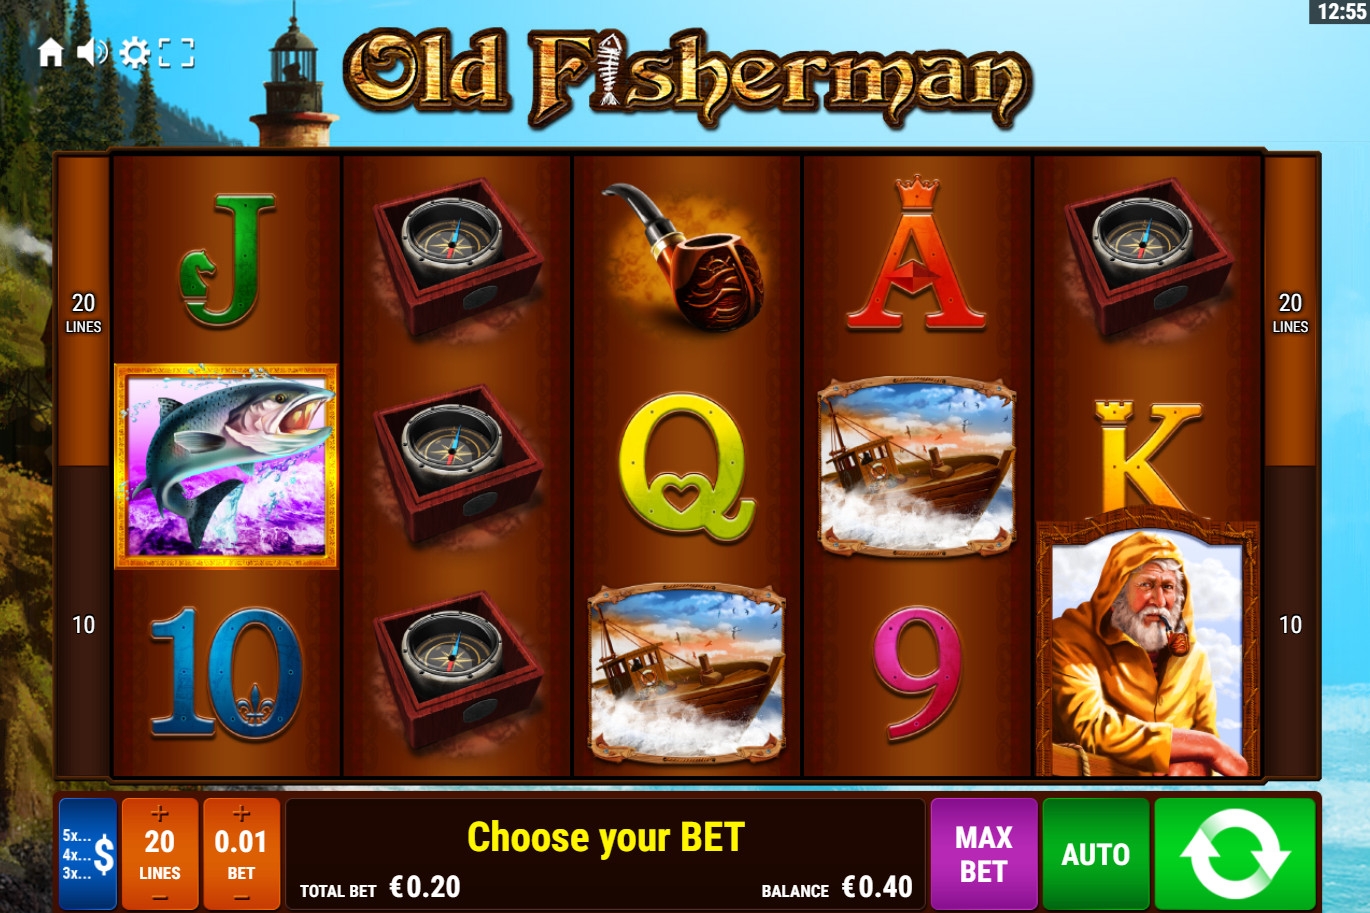 Old Fisherman (Old Fisherman) from category Slots